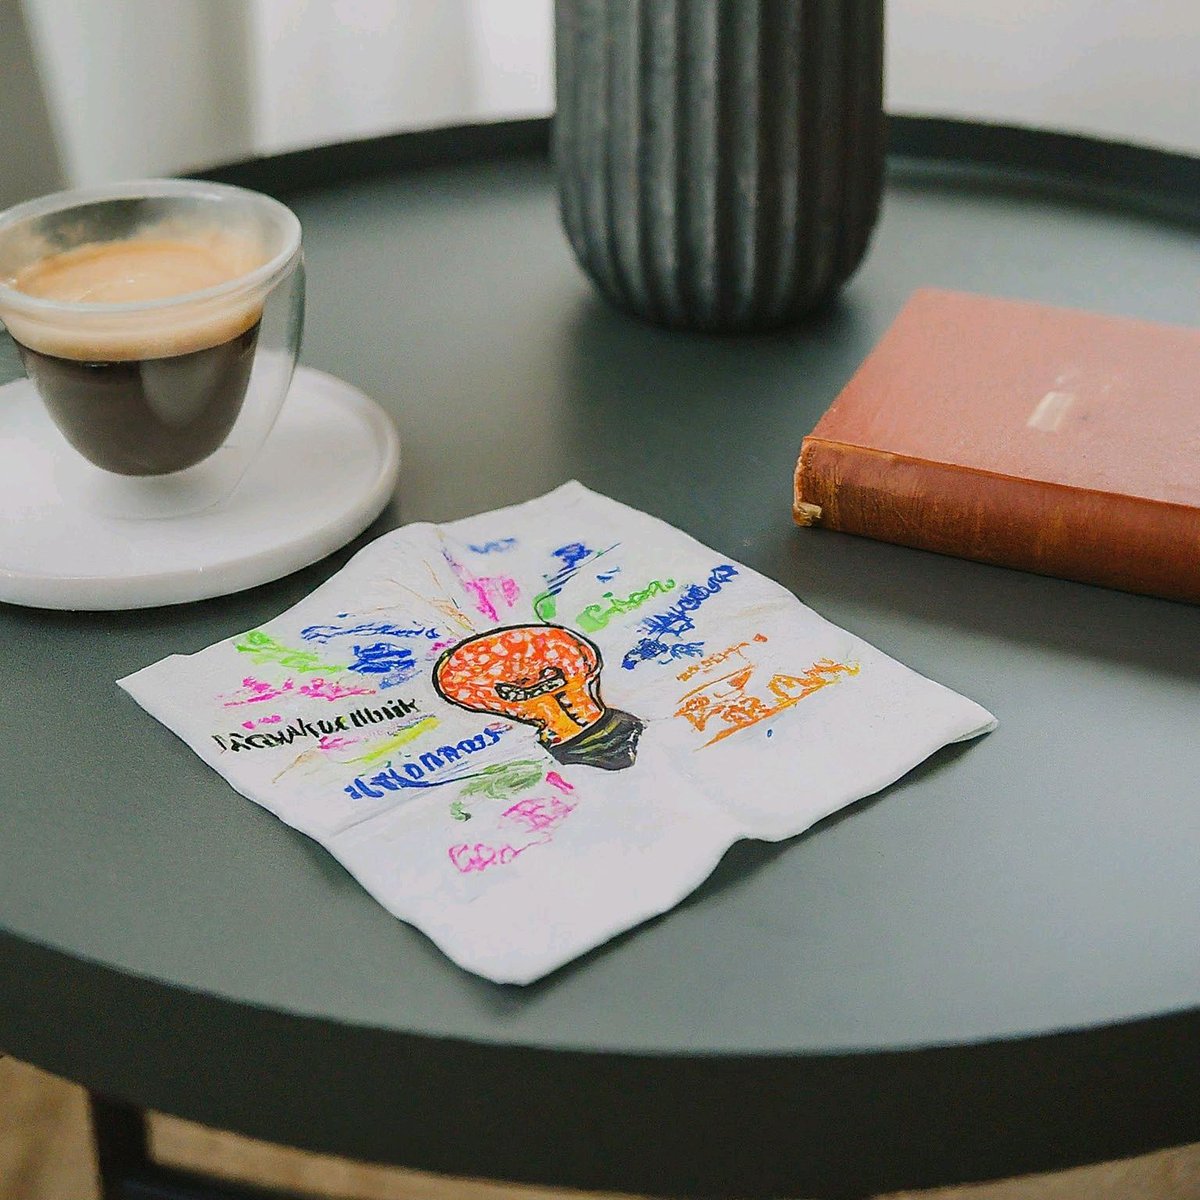 Sometimes the best business plans are written on a napkin with a half-empty coffee cup. (Source: Adaptability is key!)